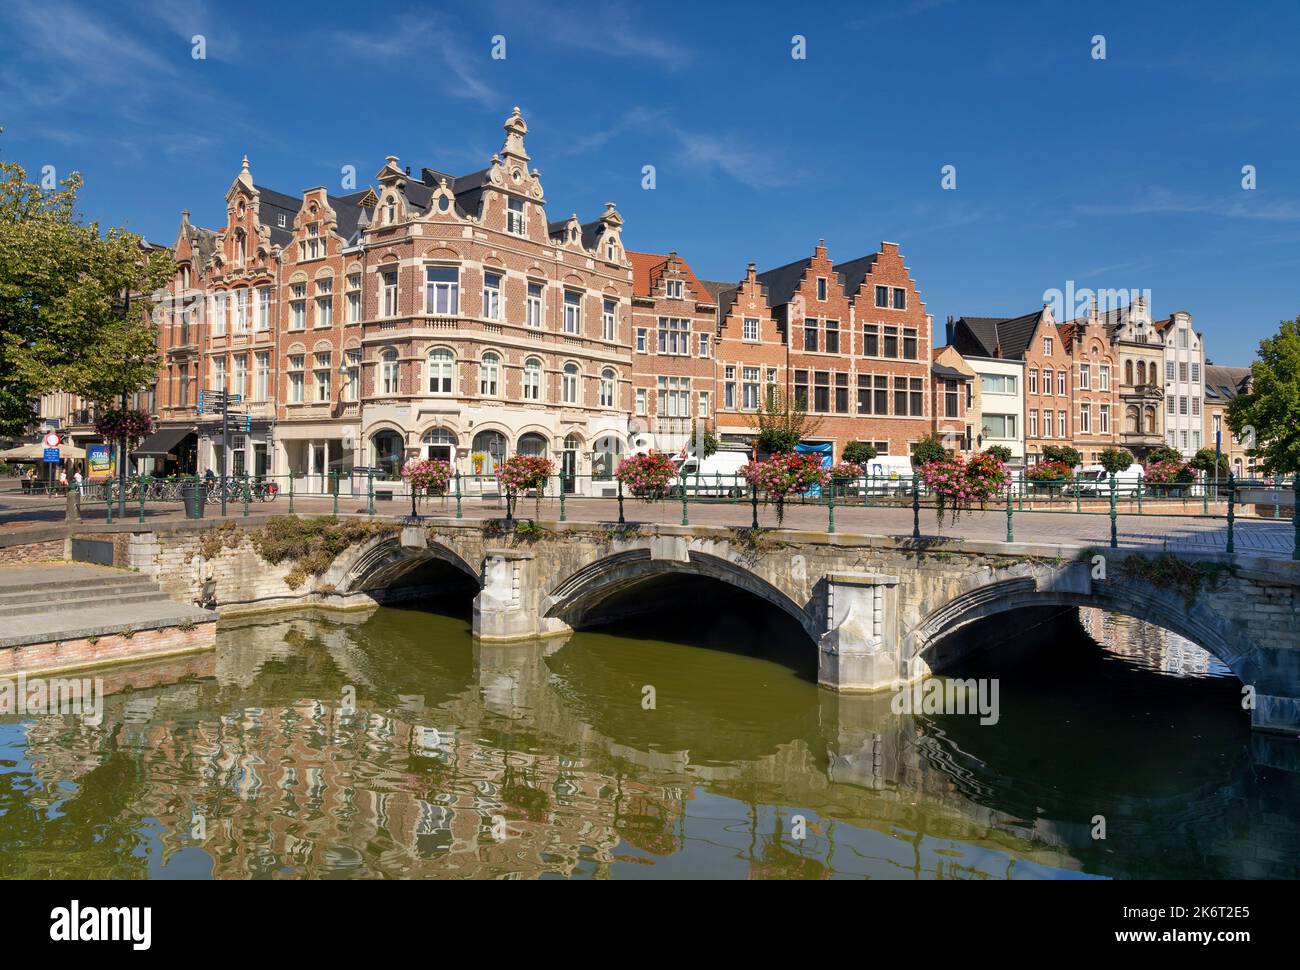 Bridge over a canal in the Belgian city Lier Stock Photo